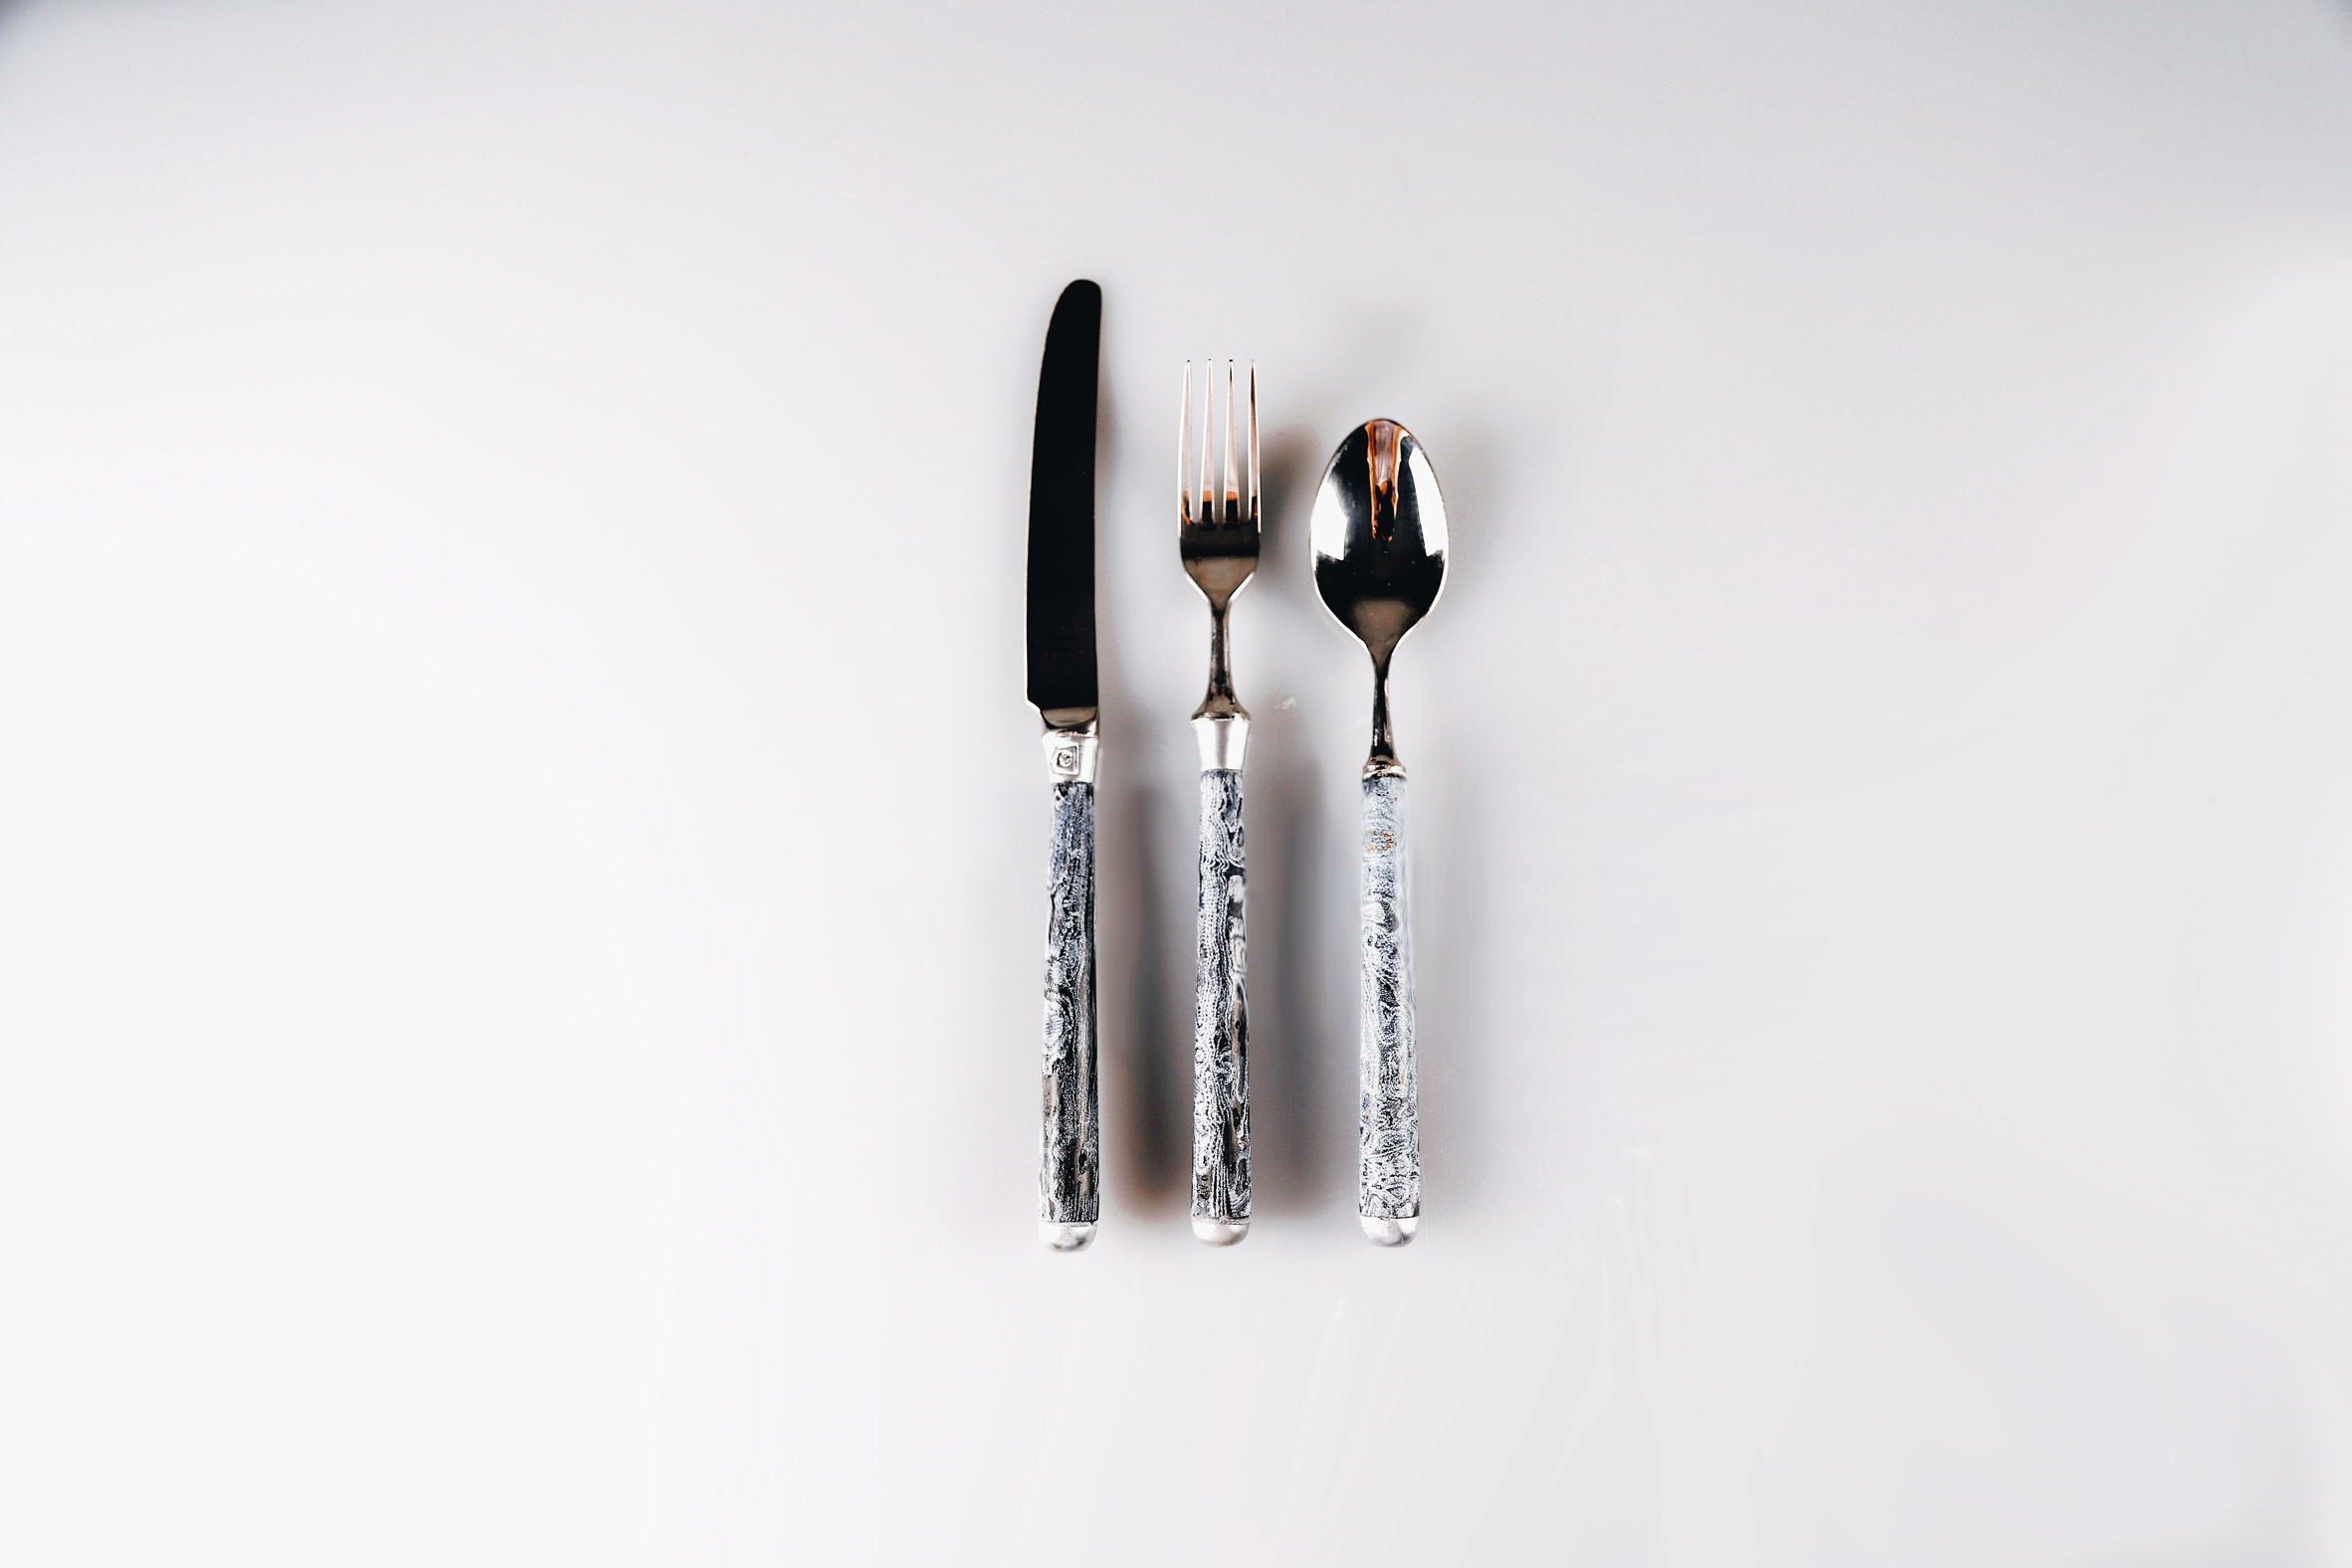 Cutlery made with upcycled waste denim and plant-based bio resin